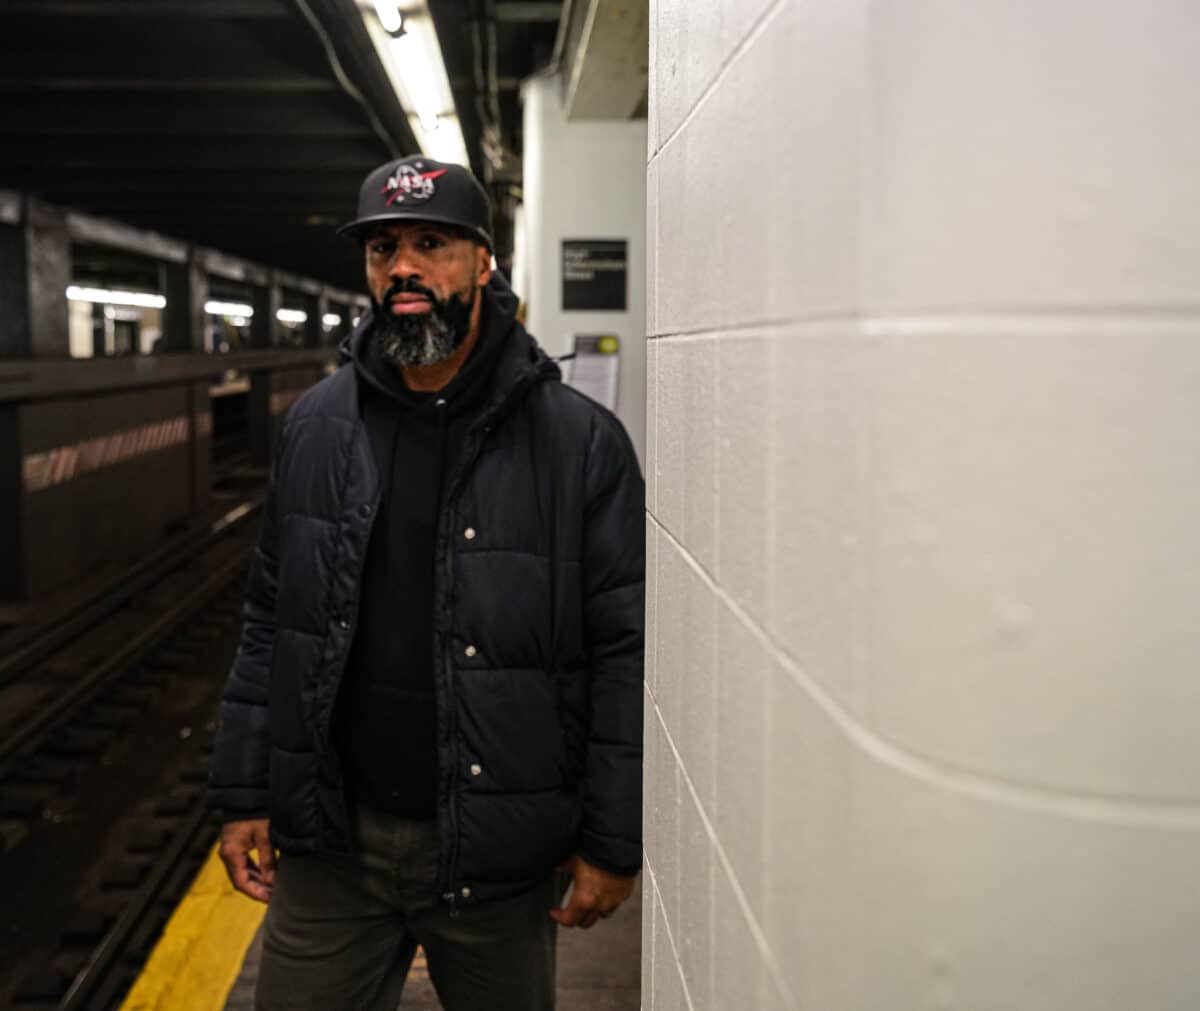 NYPD public safety team sergeant in the subway system